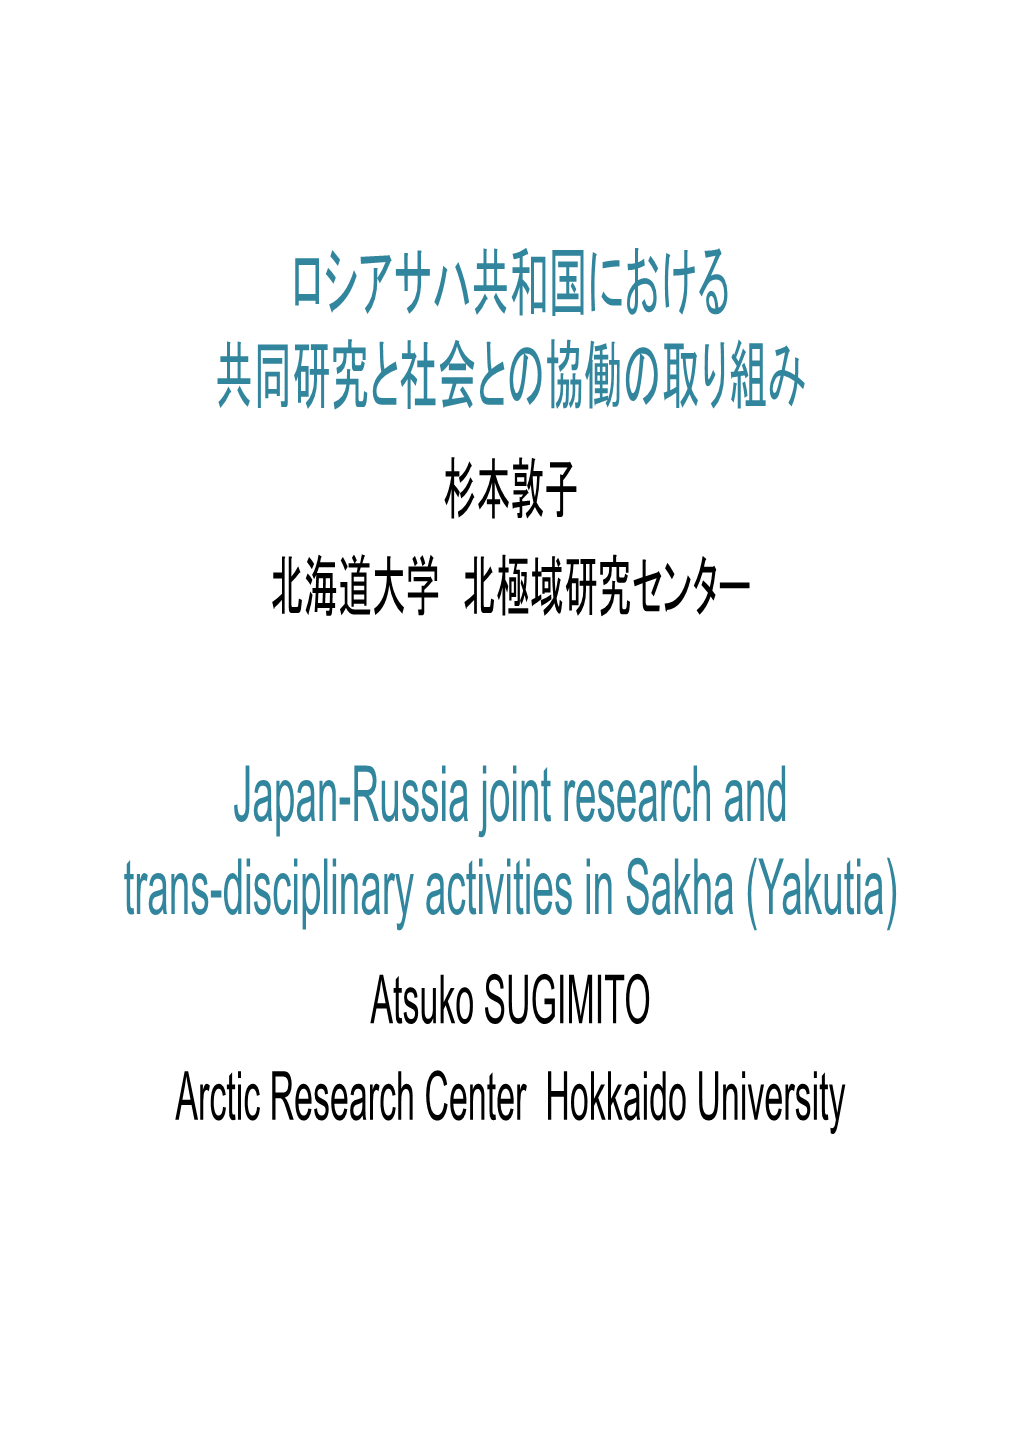 Japan-Russia Joint Research and Trans-Disciplinary Activities in Sakha